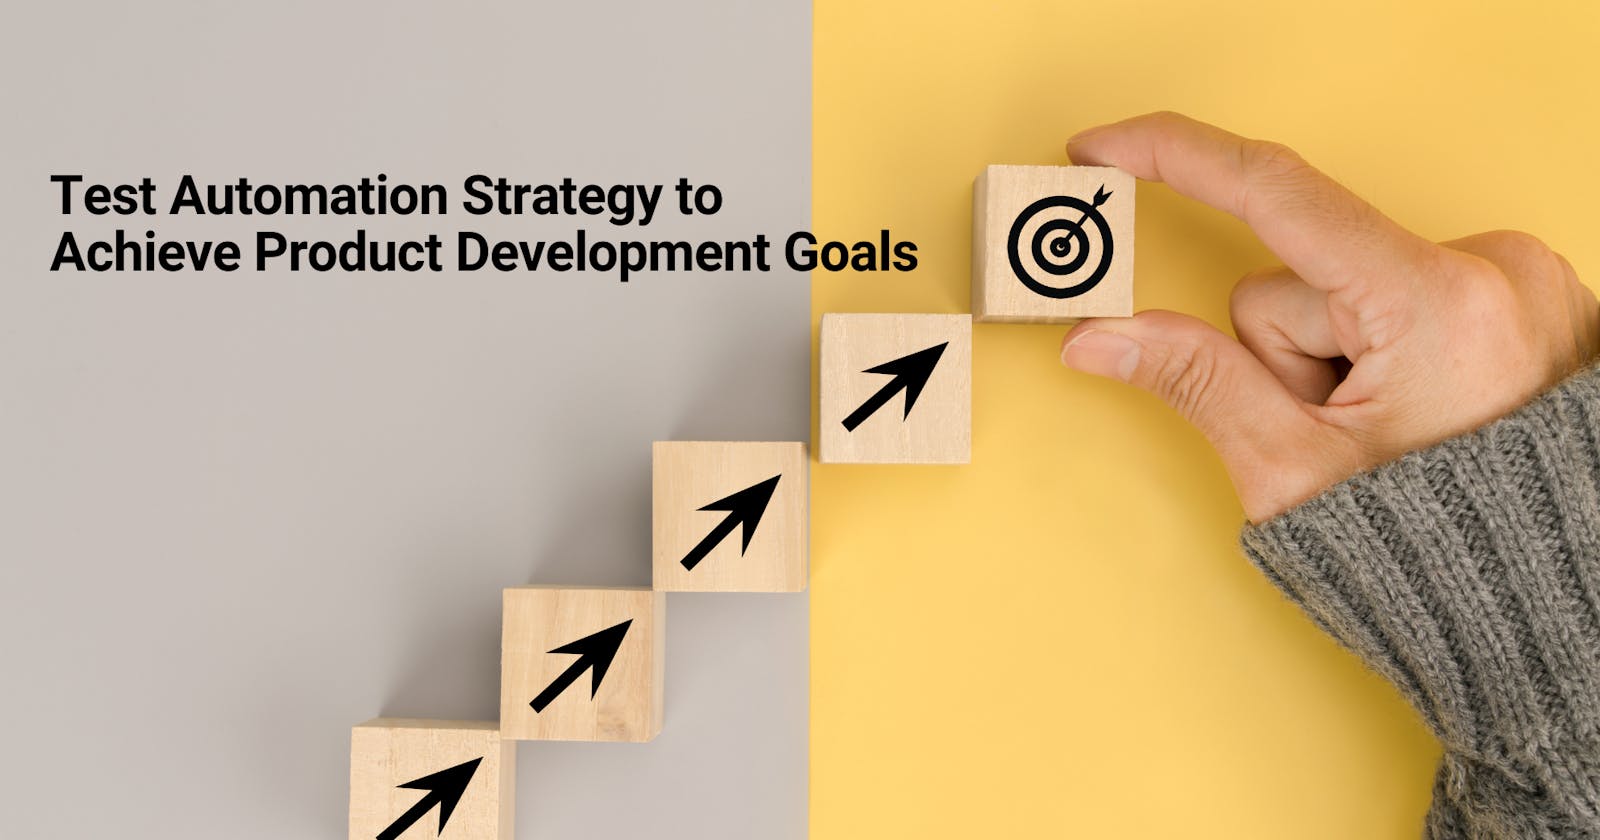 Test Automation Strategy to Achieve Product Development Goals